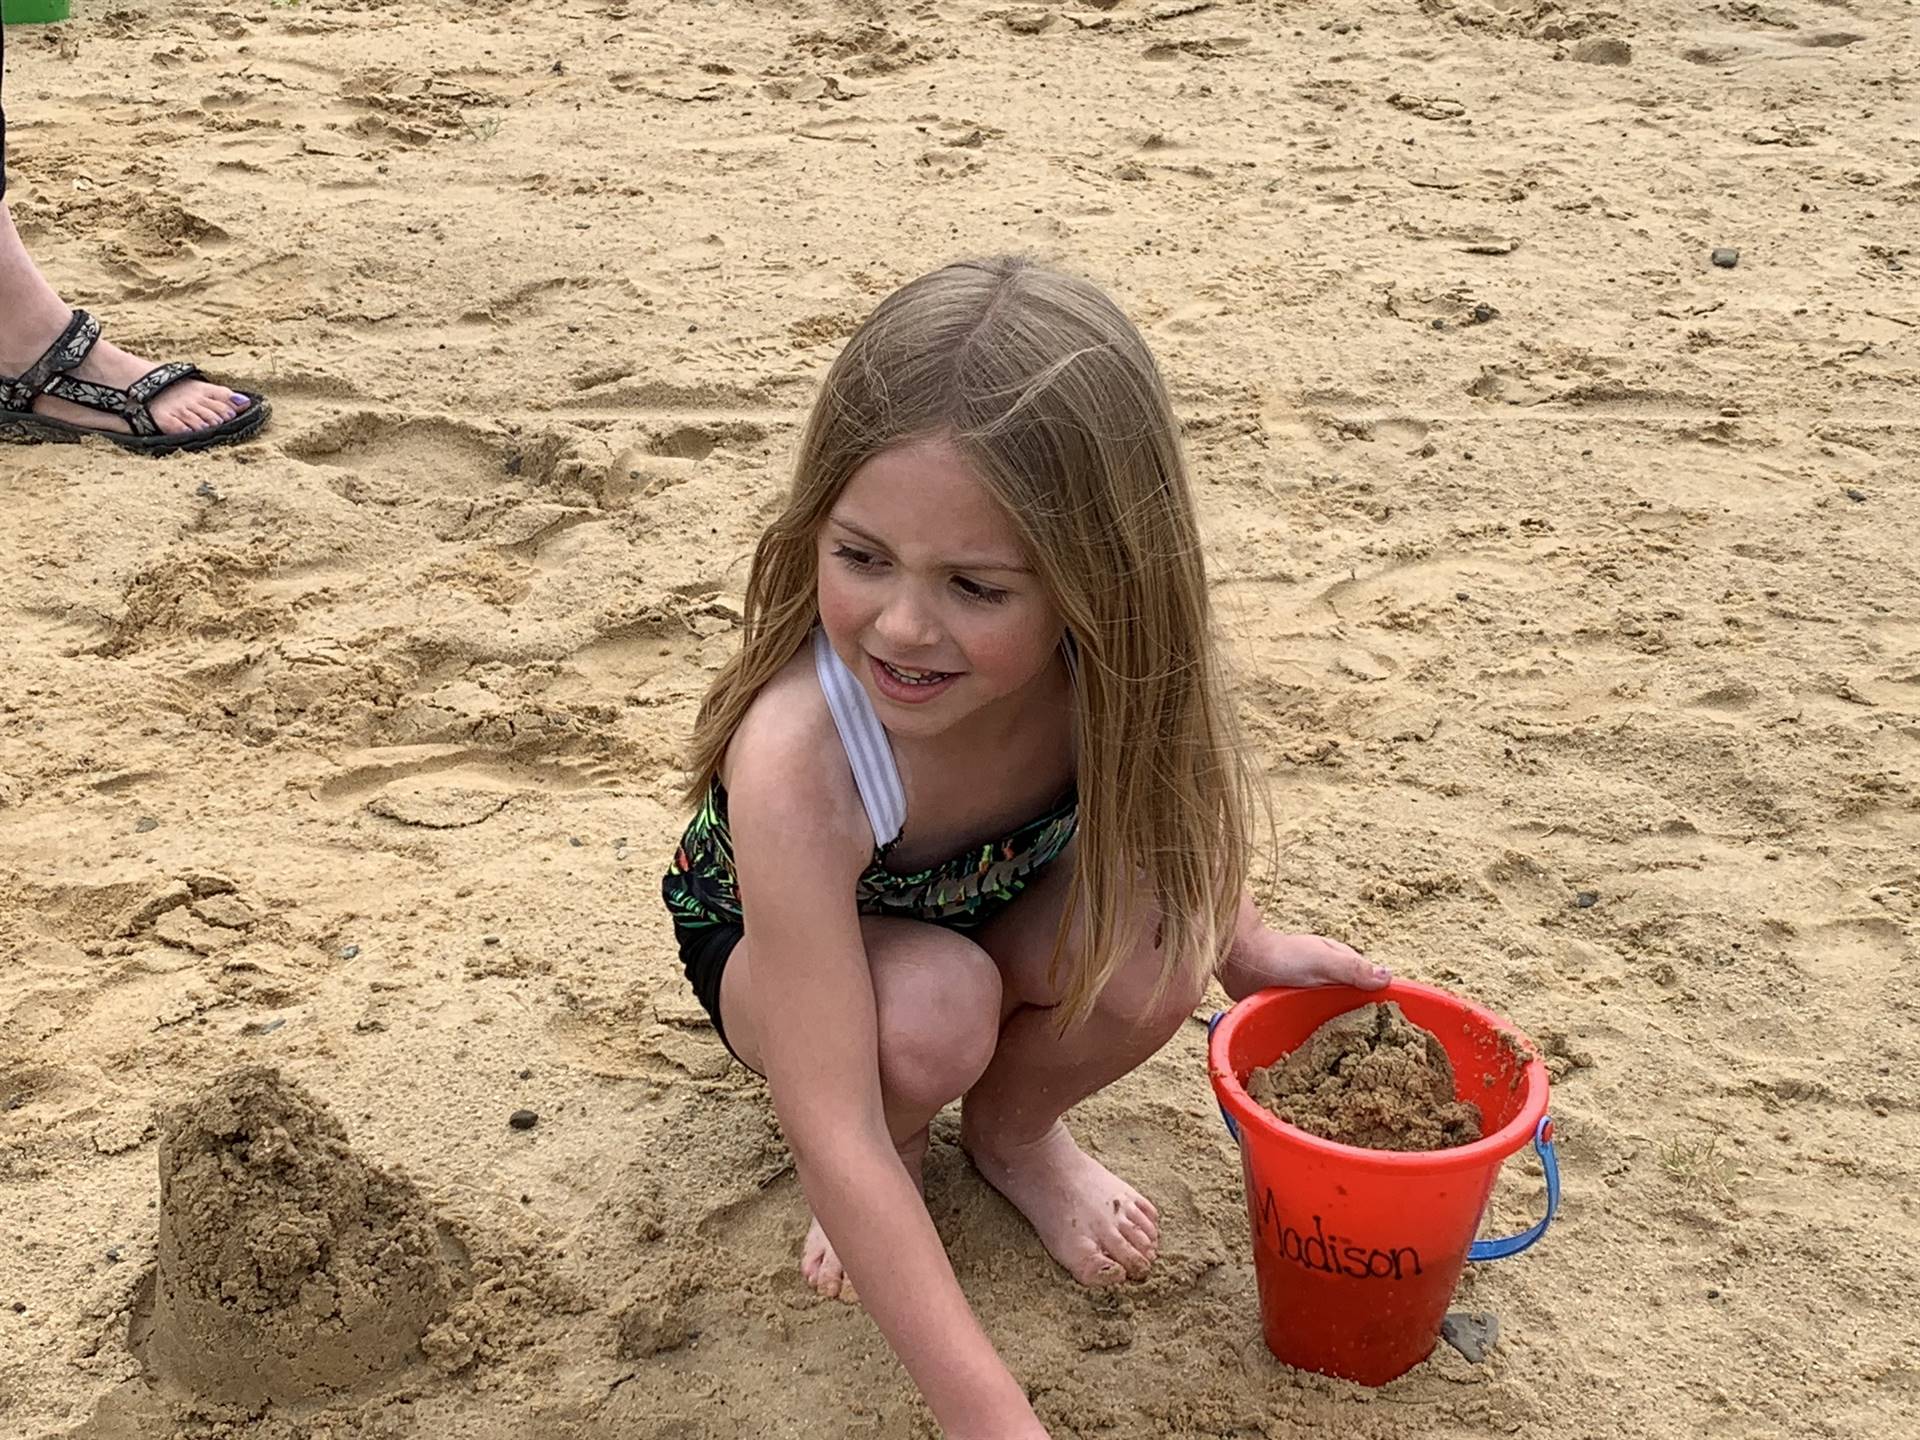 1 student with her pail in the sand.